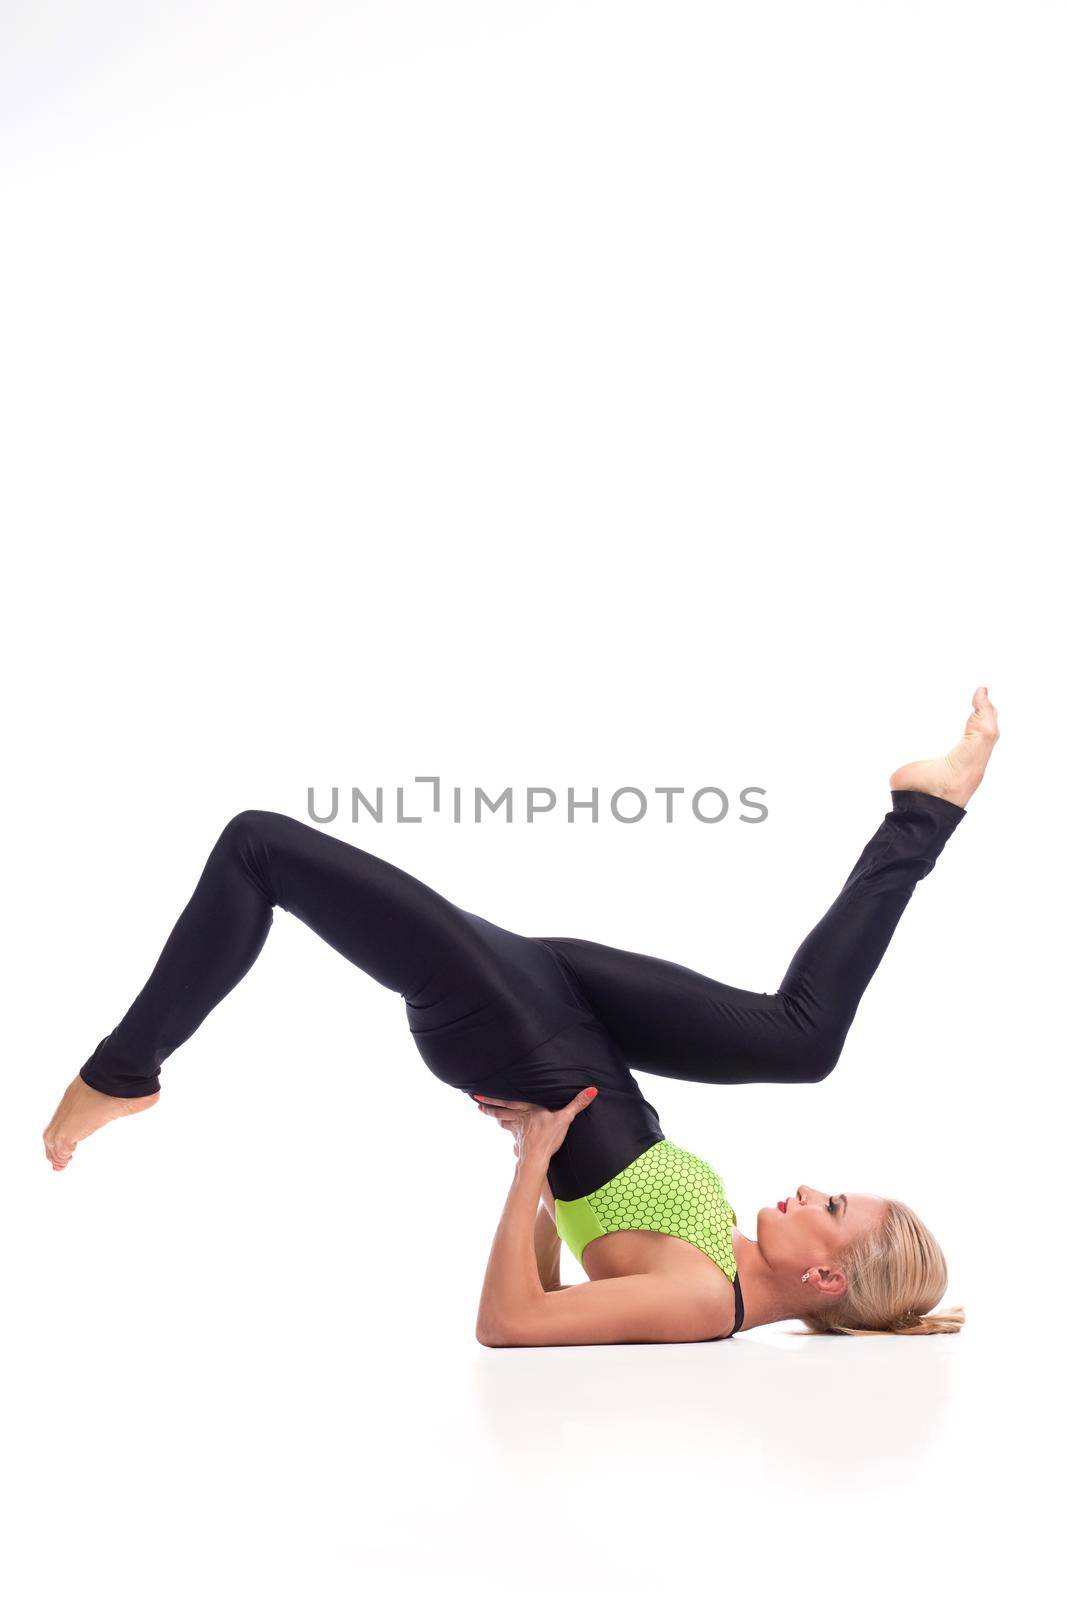 She has her balance. Vertical studio shot of a fit female gymnast doing a shoulder stand with her legs raised in the air copyspace above isolated